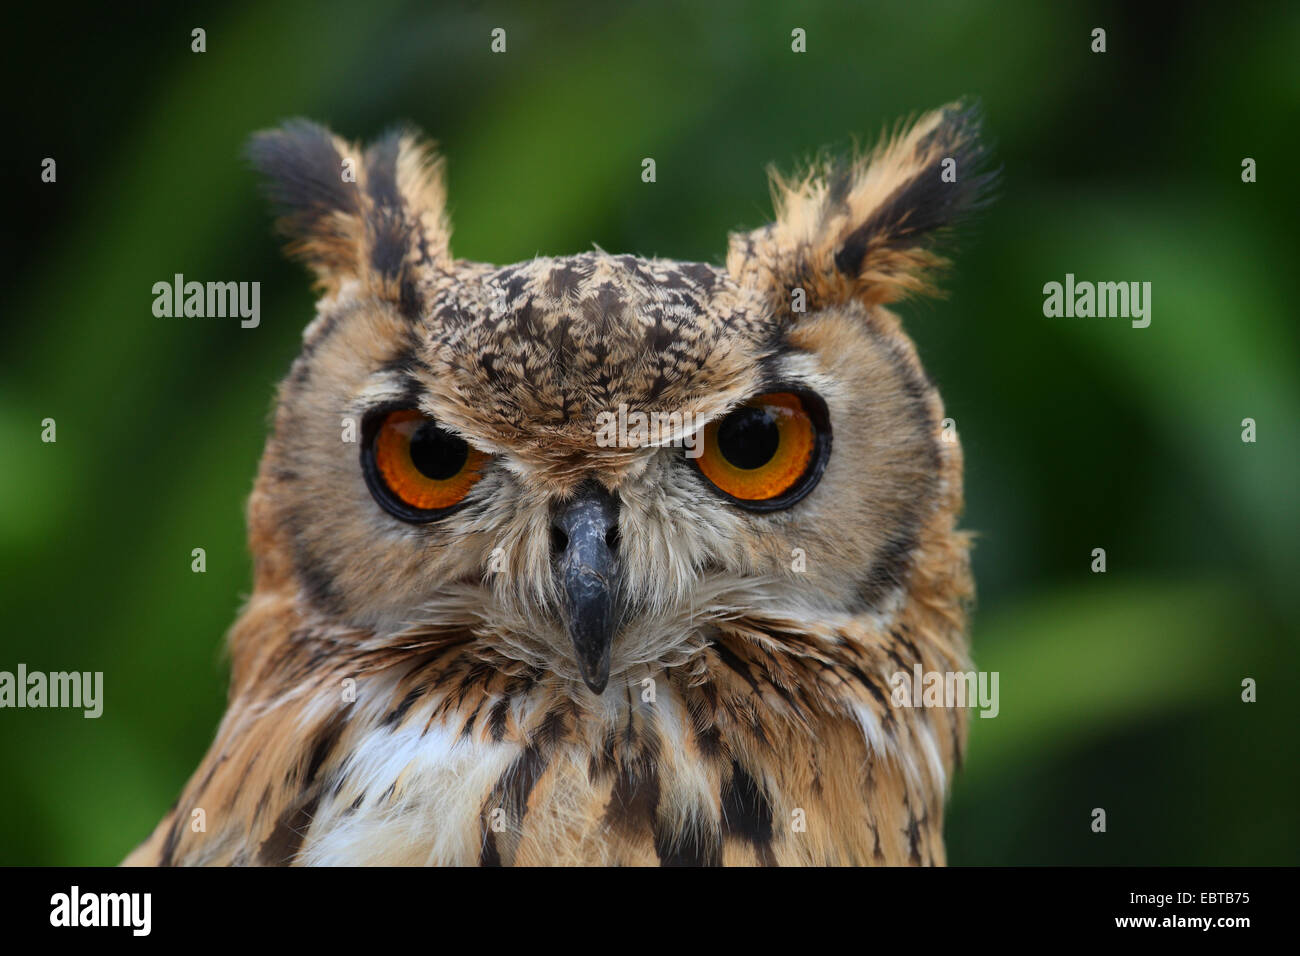 forest eagle owl (Bubo nipalensis), portrait Stock Photo